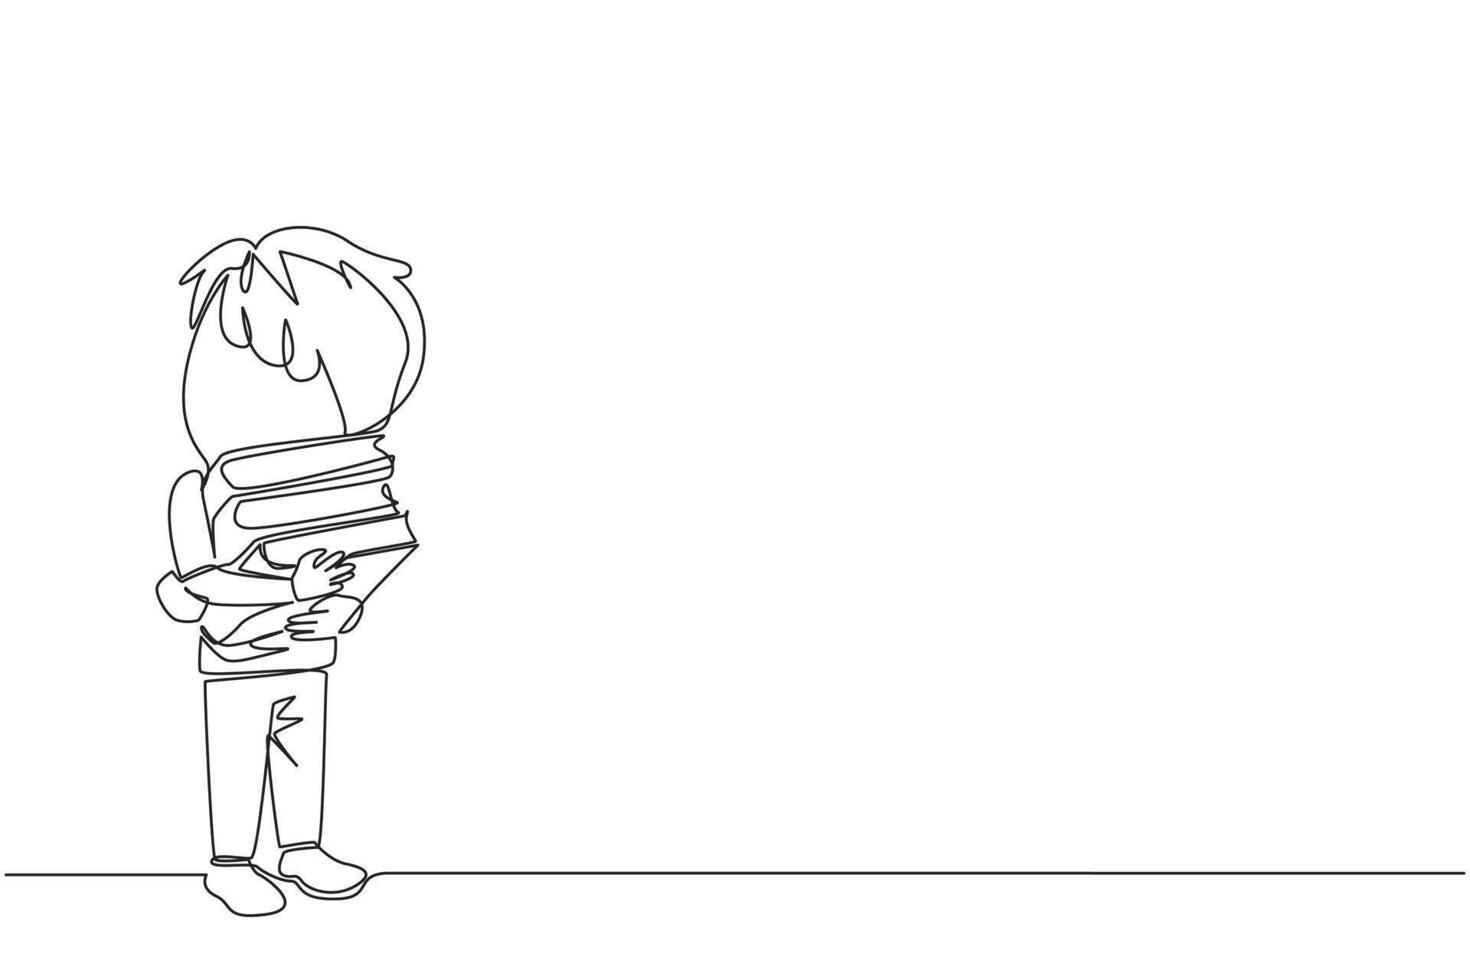 Single continuous line drawing boy standing hugging some books. Favorite book that finish reading. Some books will be donated to the national library. Charity. Knowledge. One line illustration vector